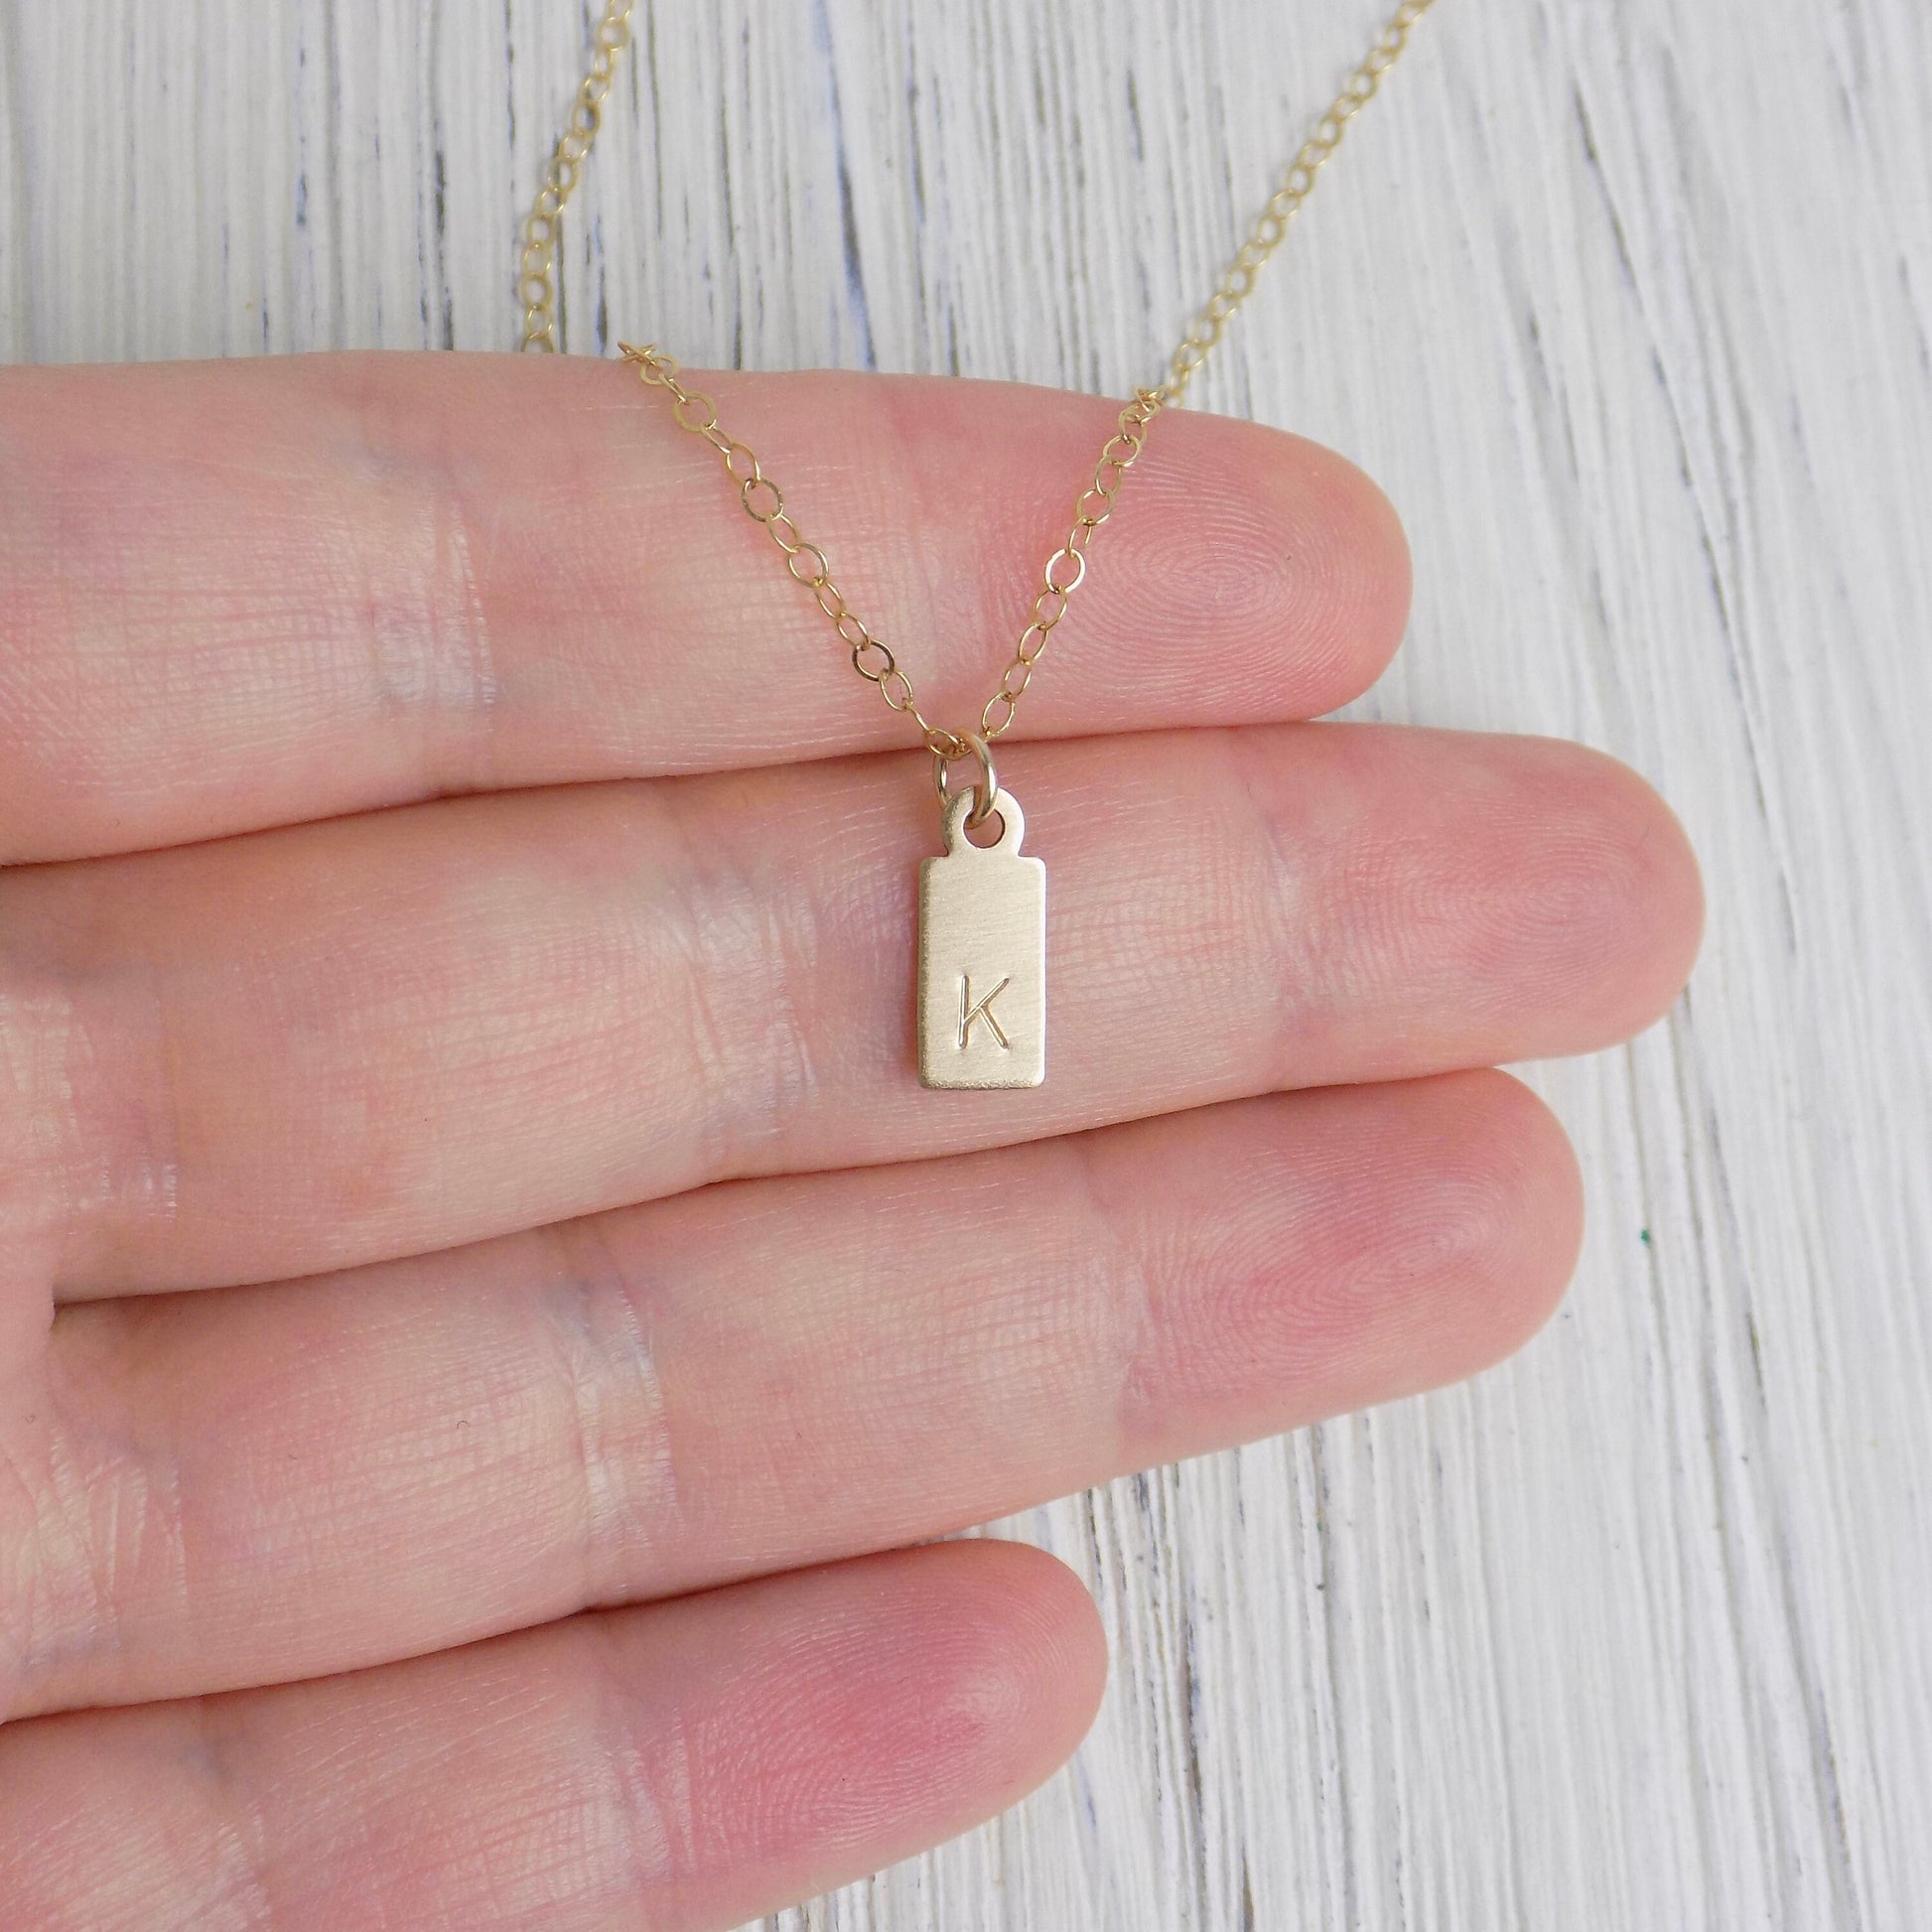 Initial Charm Necklace - Small Tag Initial Necklace Brushed Matte Satin Finish - 14K Gold Filled - Personalized Layering Necklace Gift Women